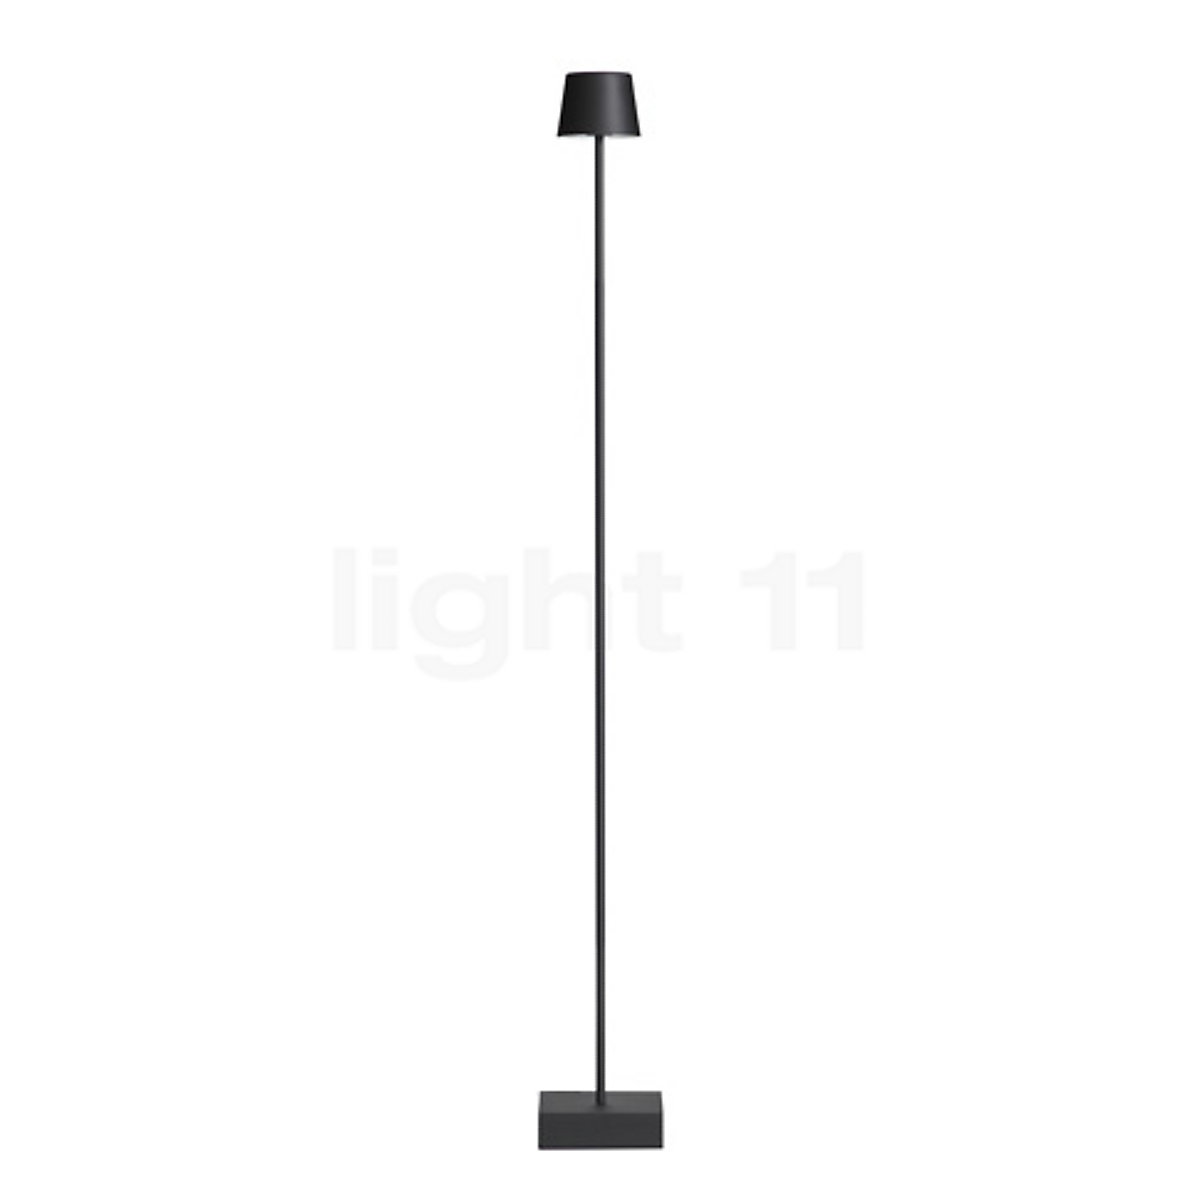 Anta Cut Floor Lamp With Cord Dimmer, Uplight Floor Lamp With Dimmer